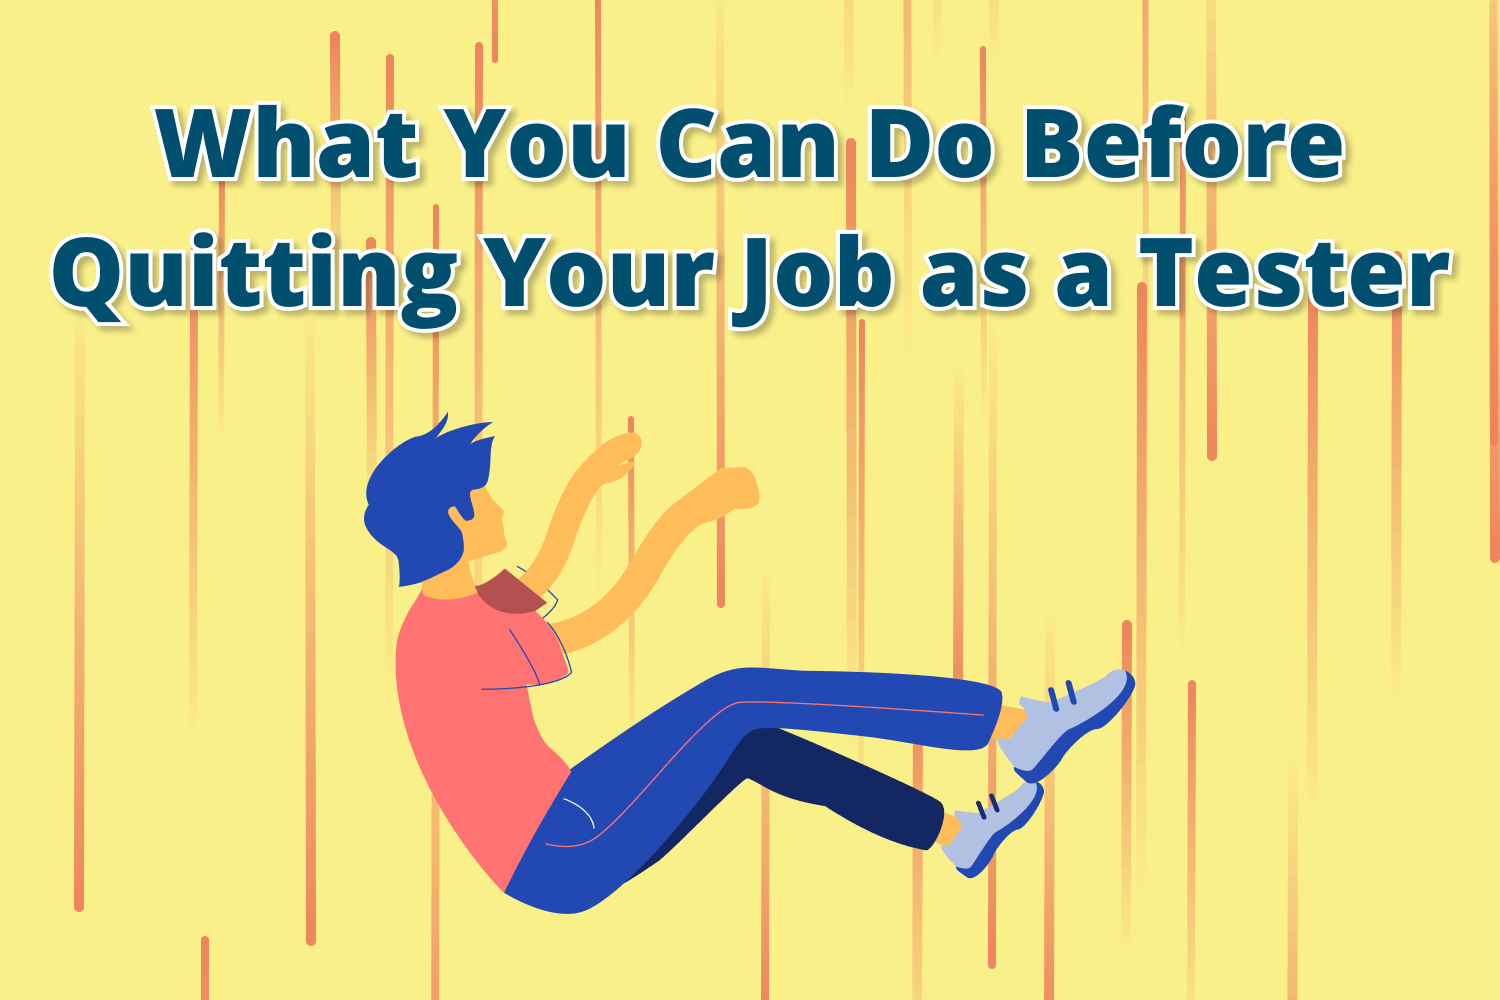 What You Can Do Before Quitting Your Job as a Tester